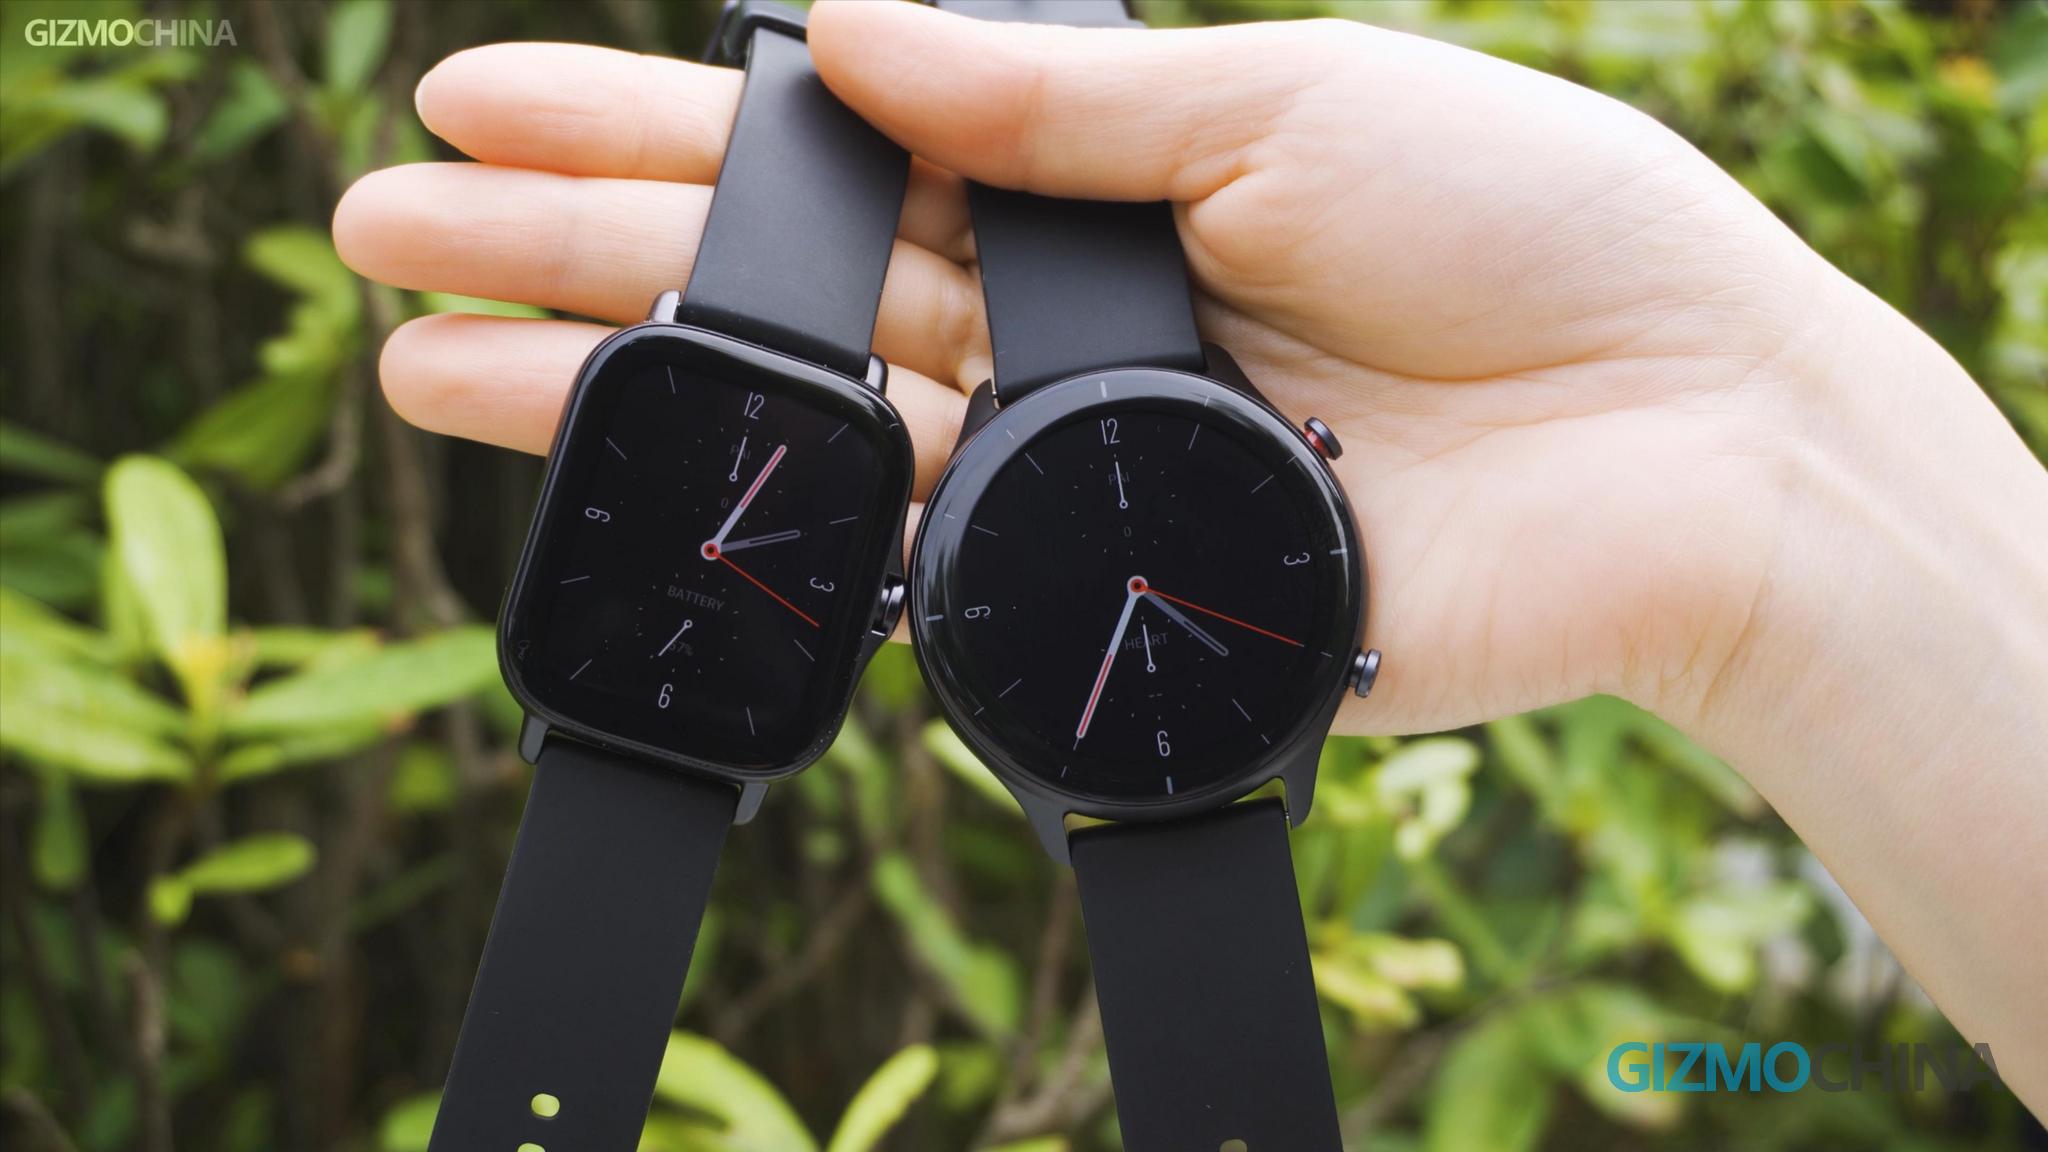 Amazfit GTR 2 and GTS 2 hands-on review: Affordable, fashionable